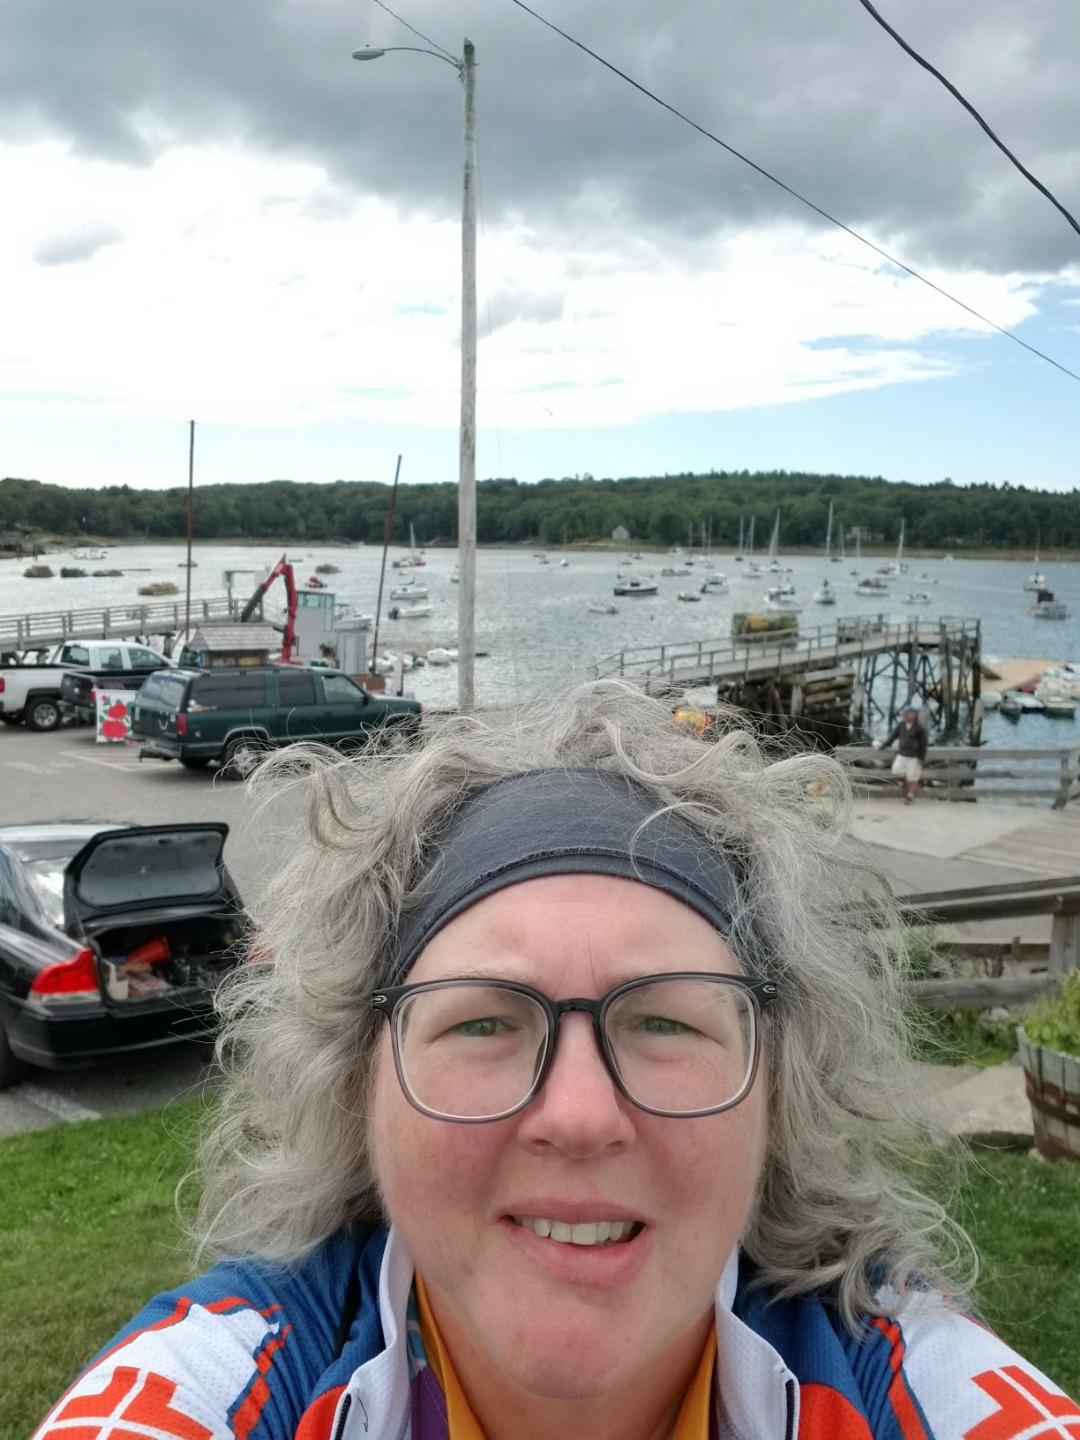 Kelly in front of boats